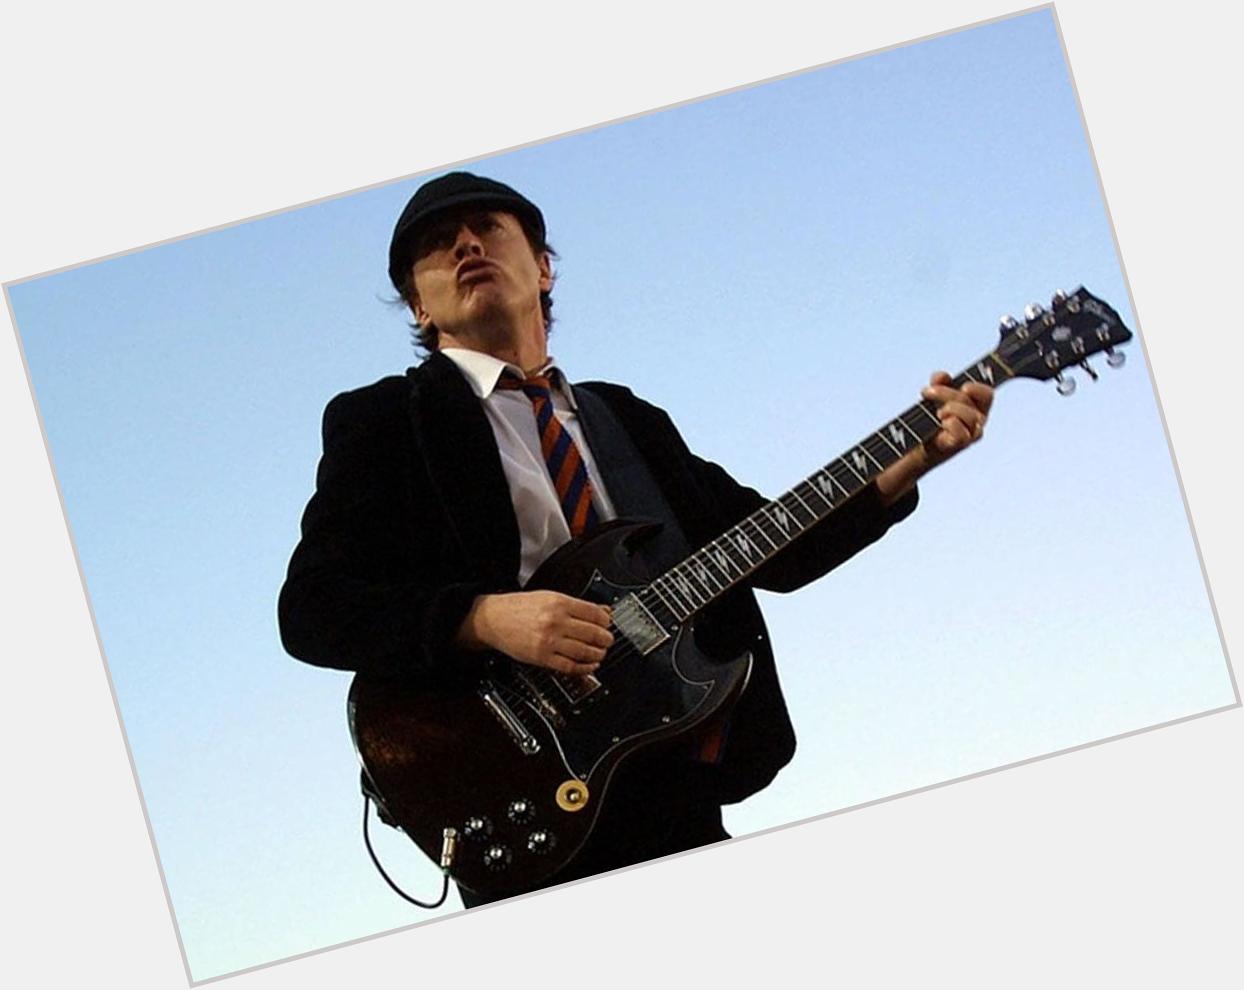 Happy 60th birthday to Angus Young!  